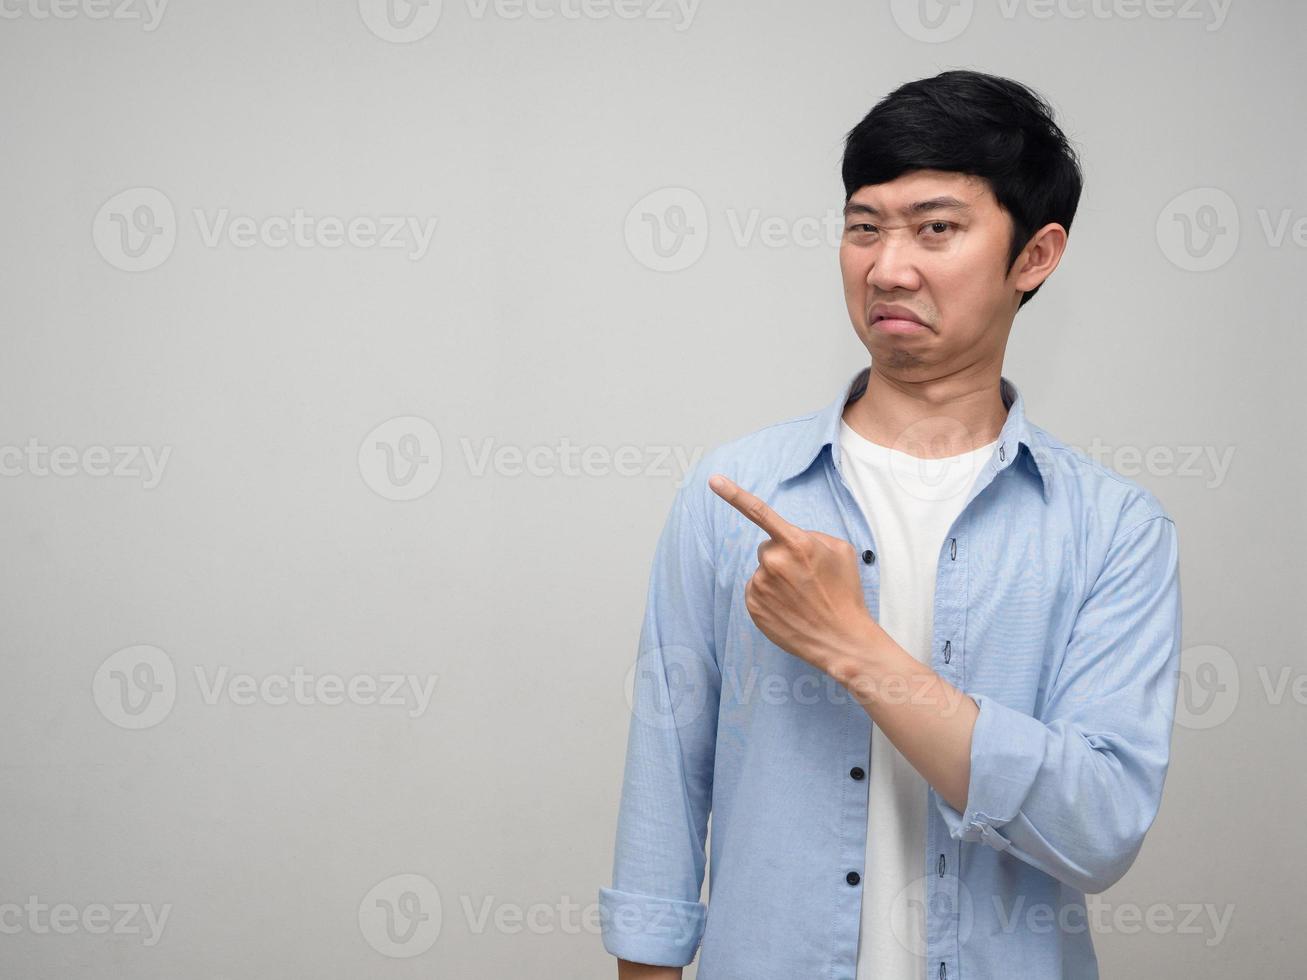 Man blue shirt boring face gesture point finger isolated photo